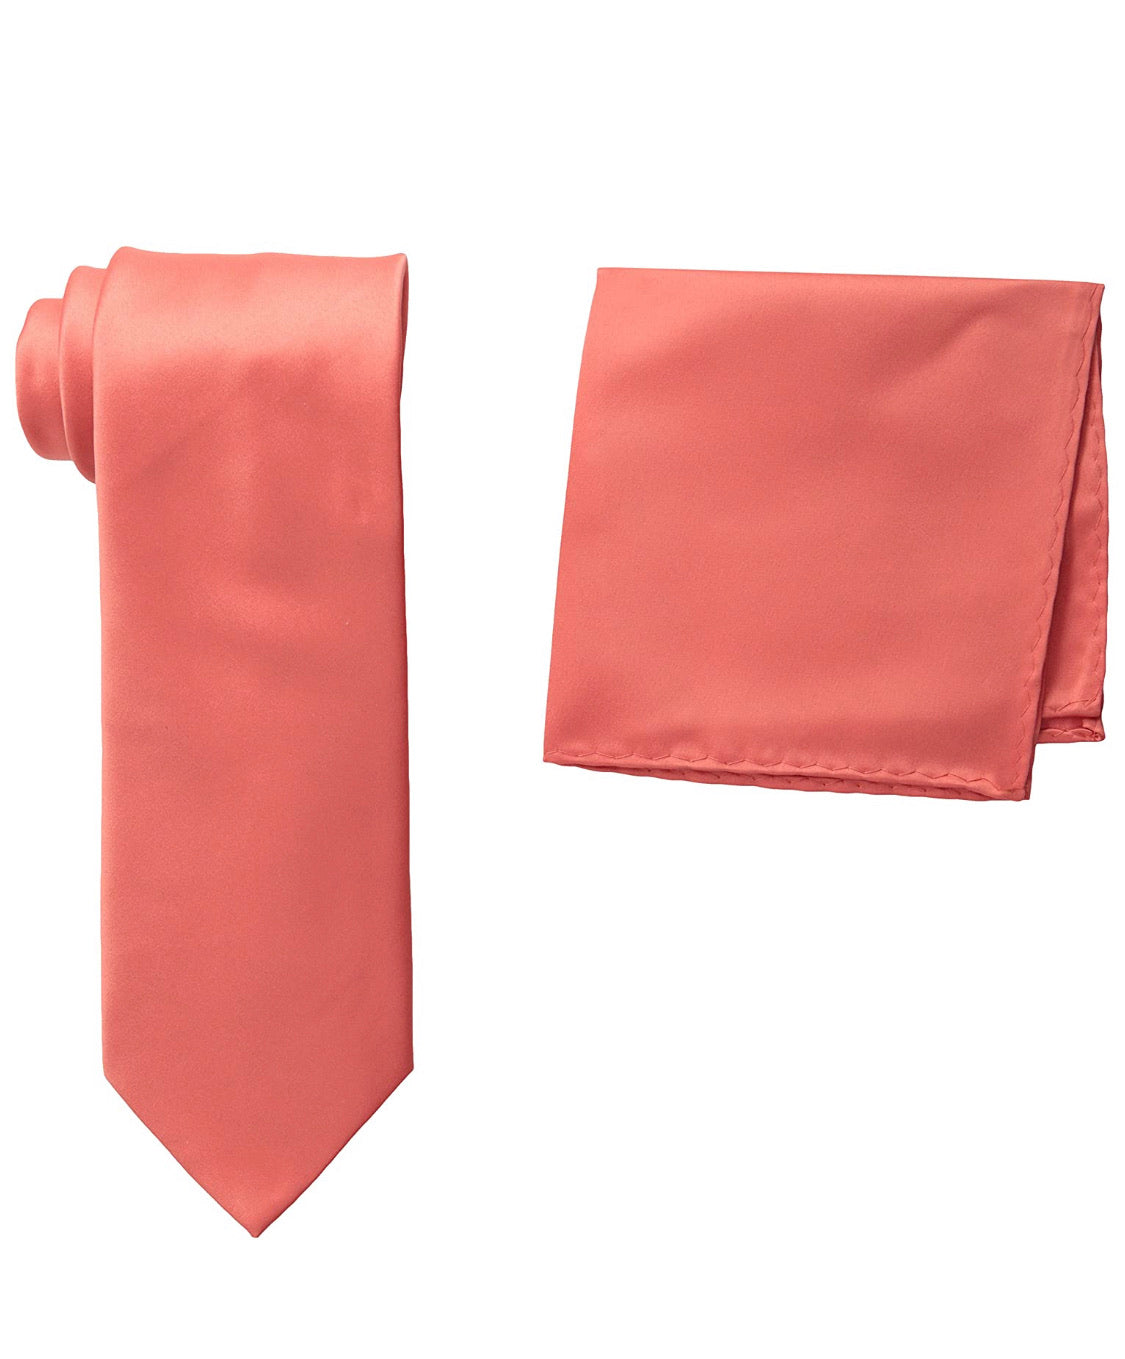 Stacy Adams Solid Coral Tie and Hanky - On Time Fashions Tuscaloosa